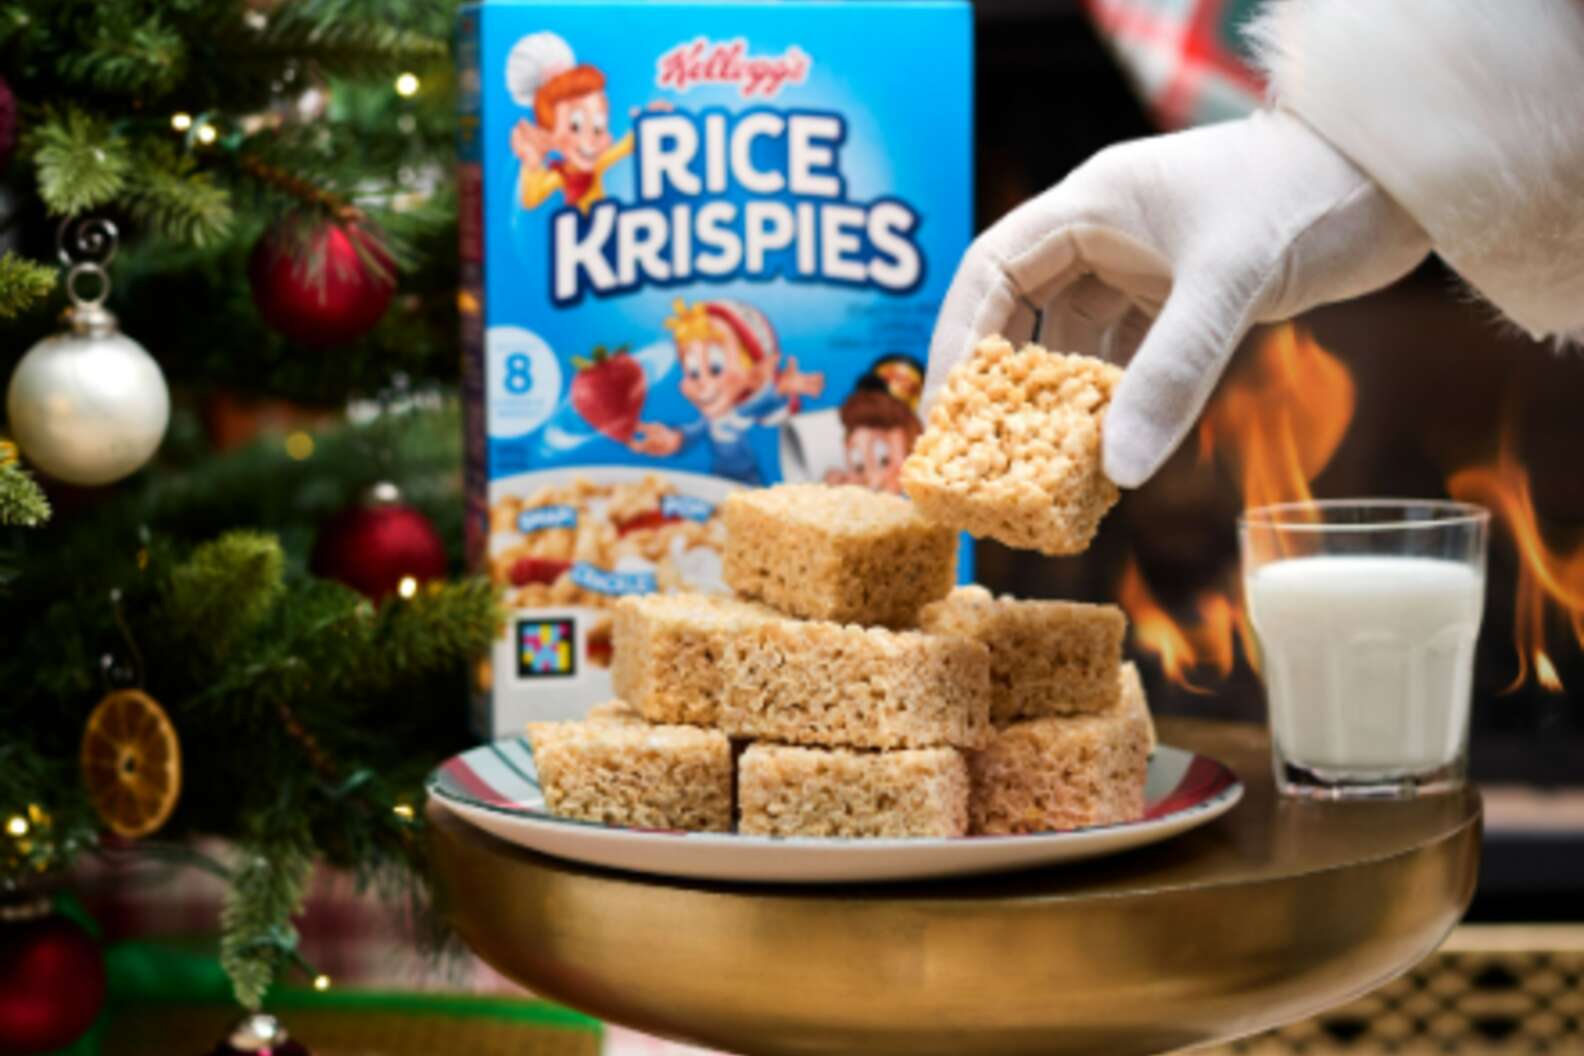 Courtesy of Rice Krispies